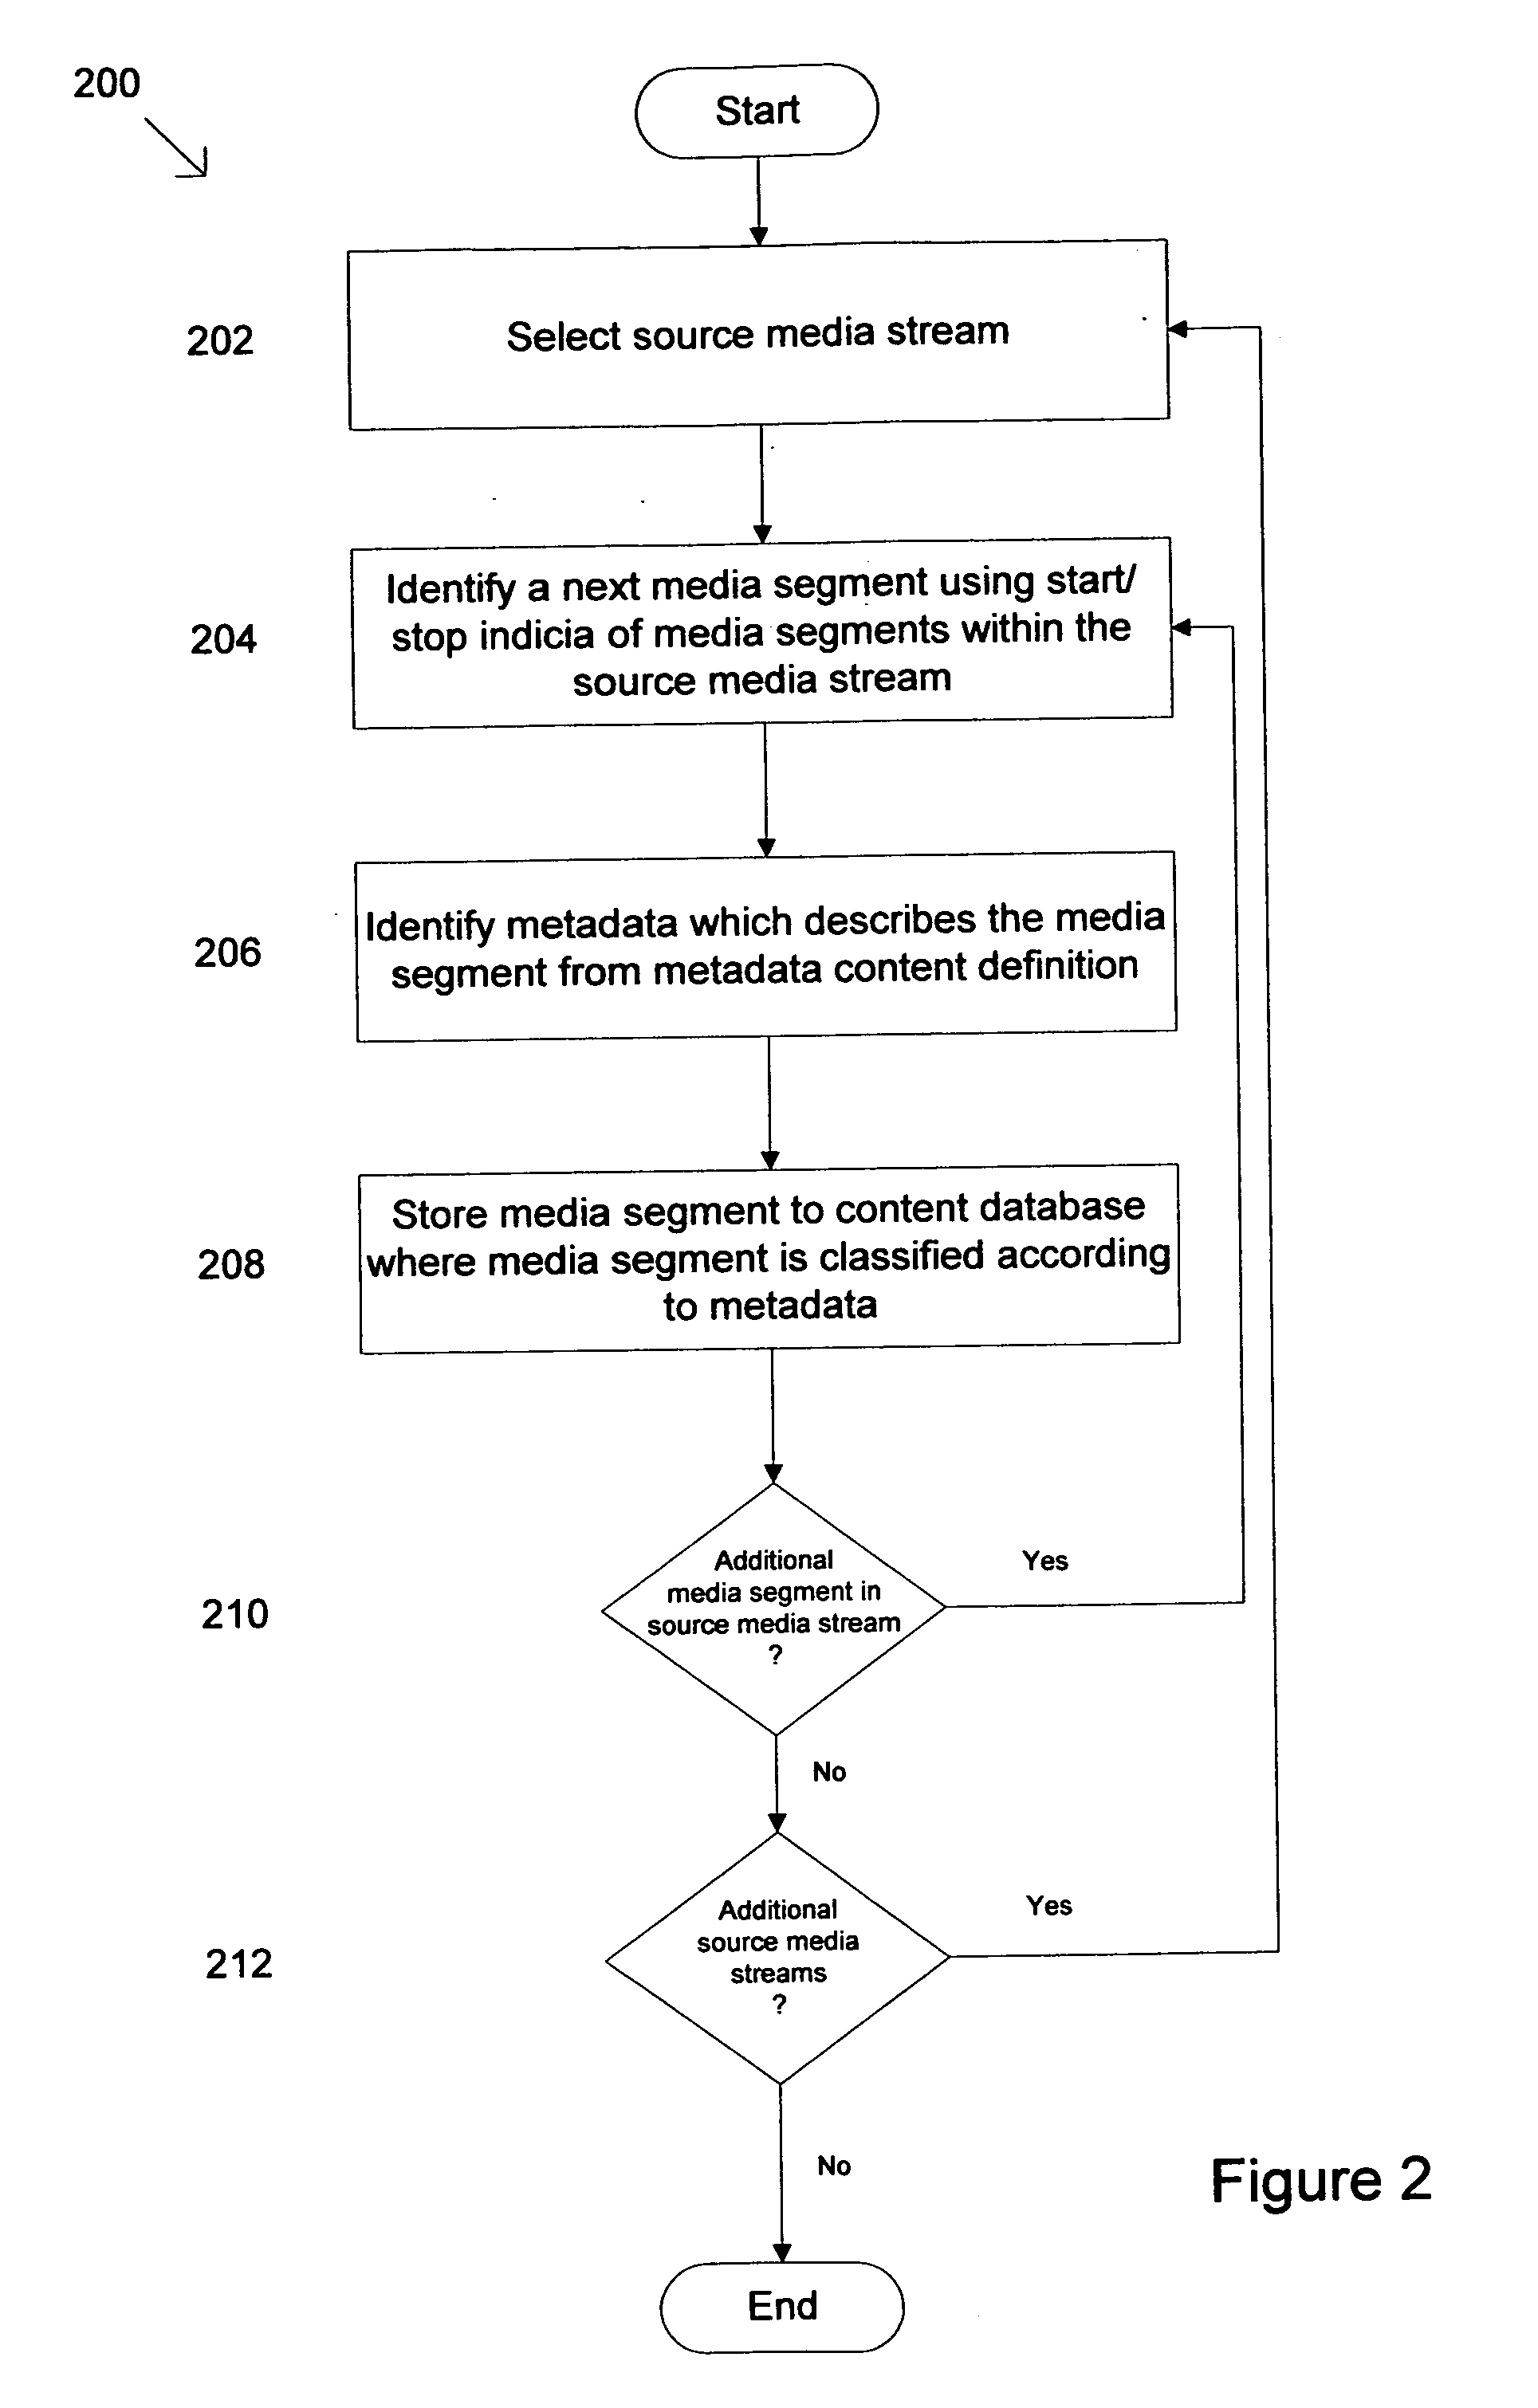 Method of forming a multimedia package